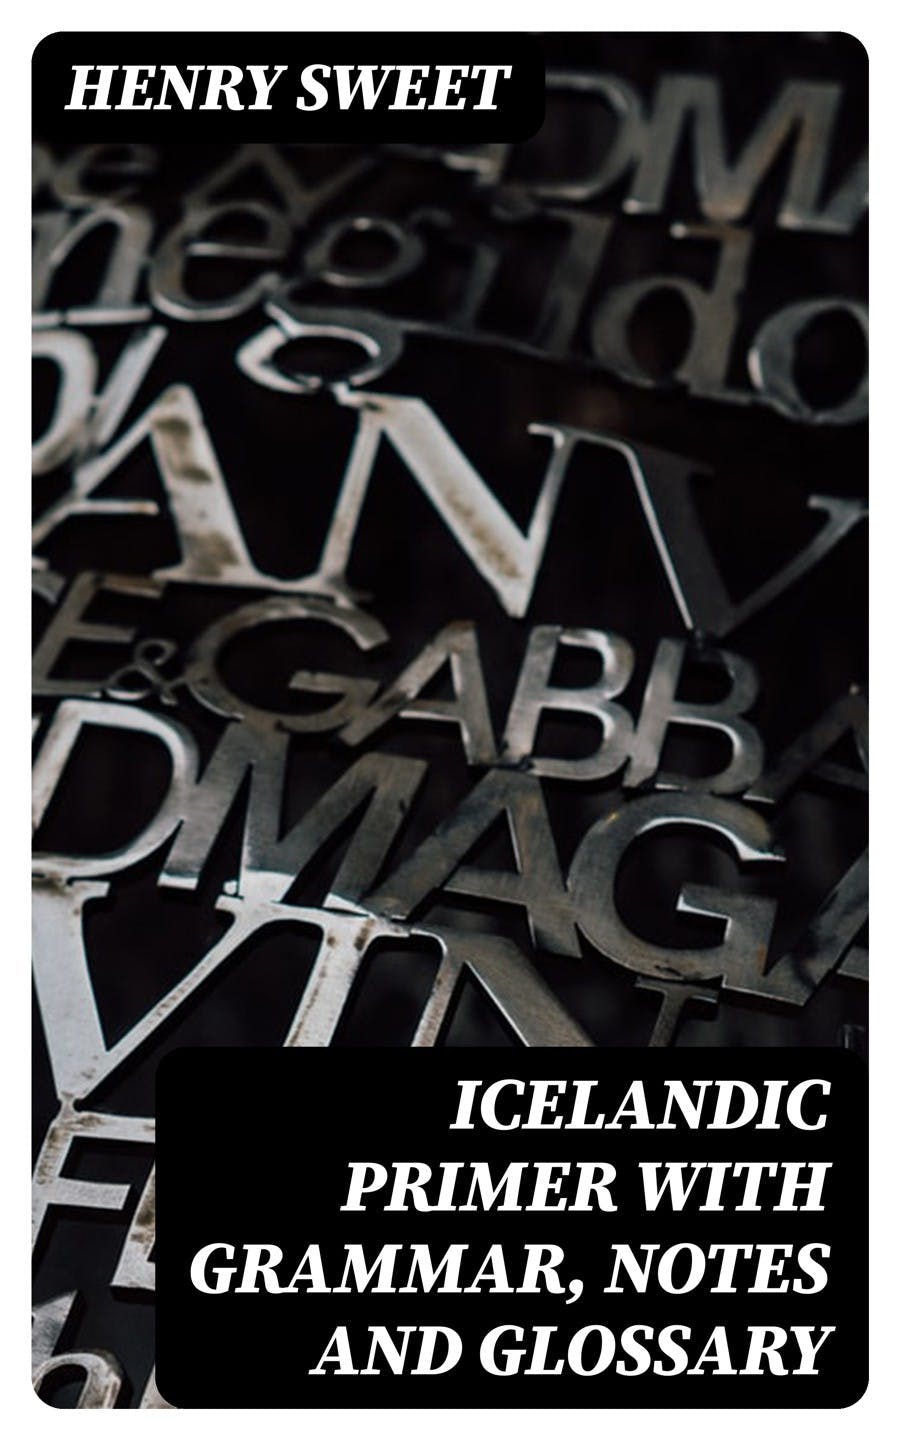 Icelandic Primer with Grammar, Notes and Glossary | E-book | Henry